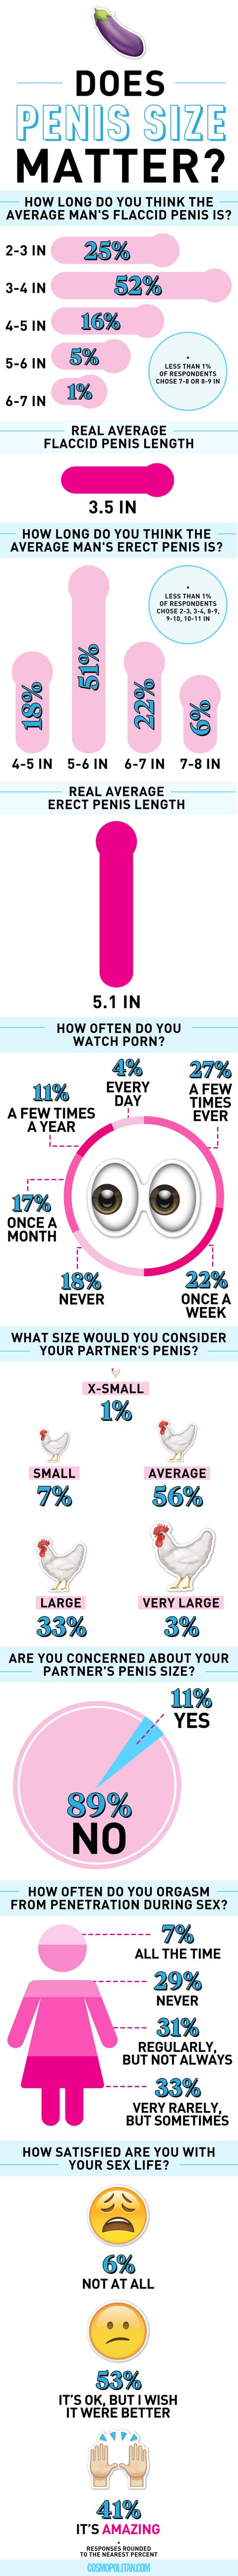 Average Pornstar Penis Size - Here's What Millennial Women Really Think About Penis Size